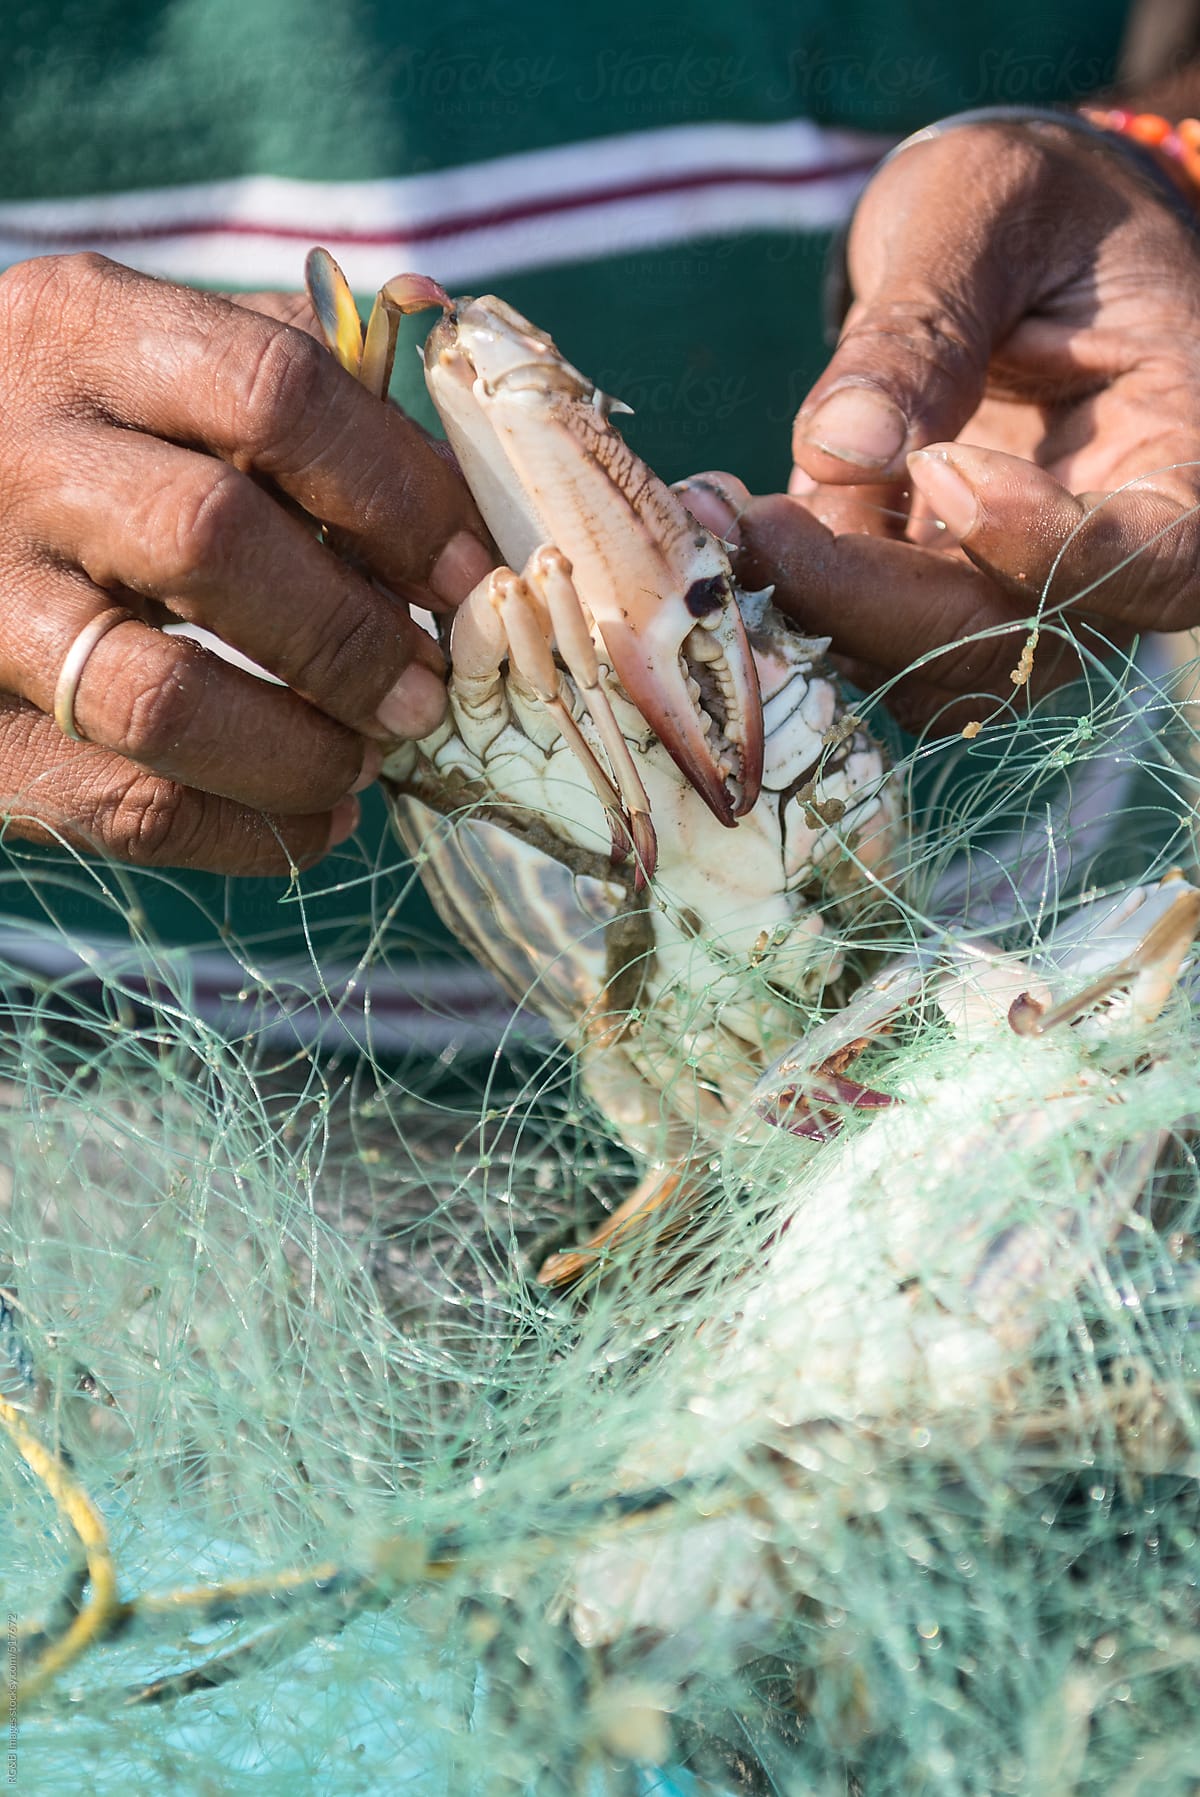 Man Collecting Crab From His Fishing Net Net by Stocksy